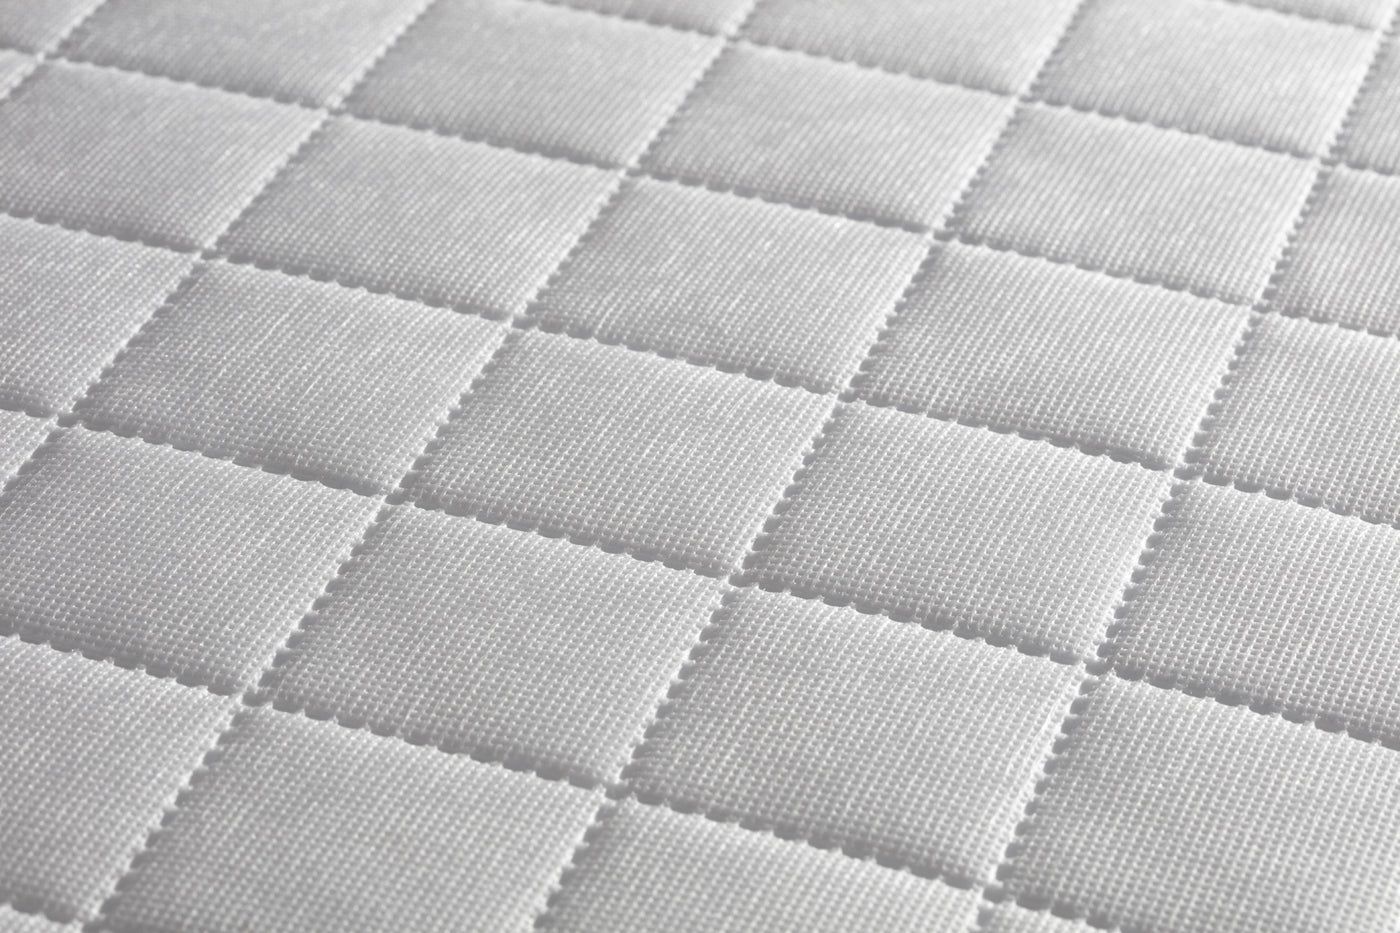 Silver Cross Quilted TrueFit Classic Cot Bed Pocket Sprung Mattress